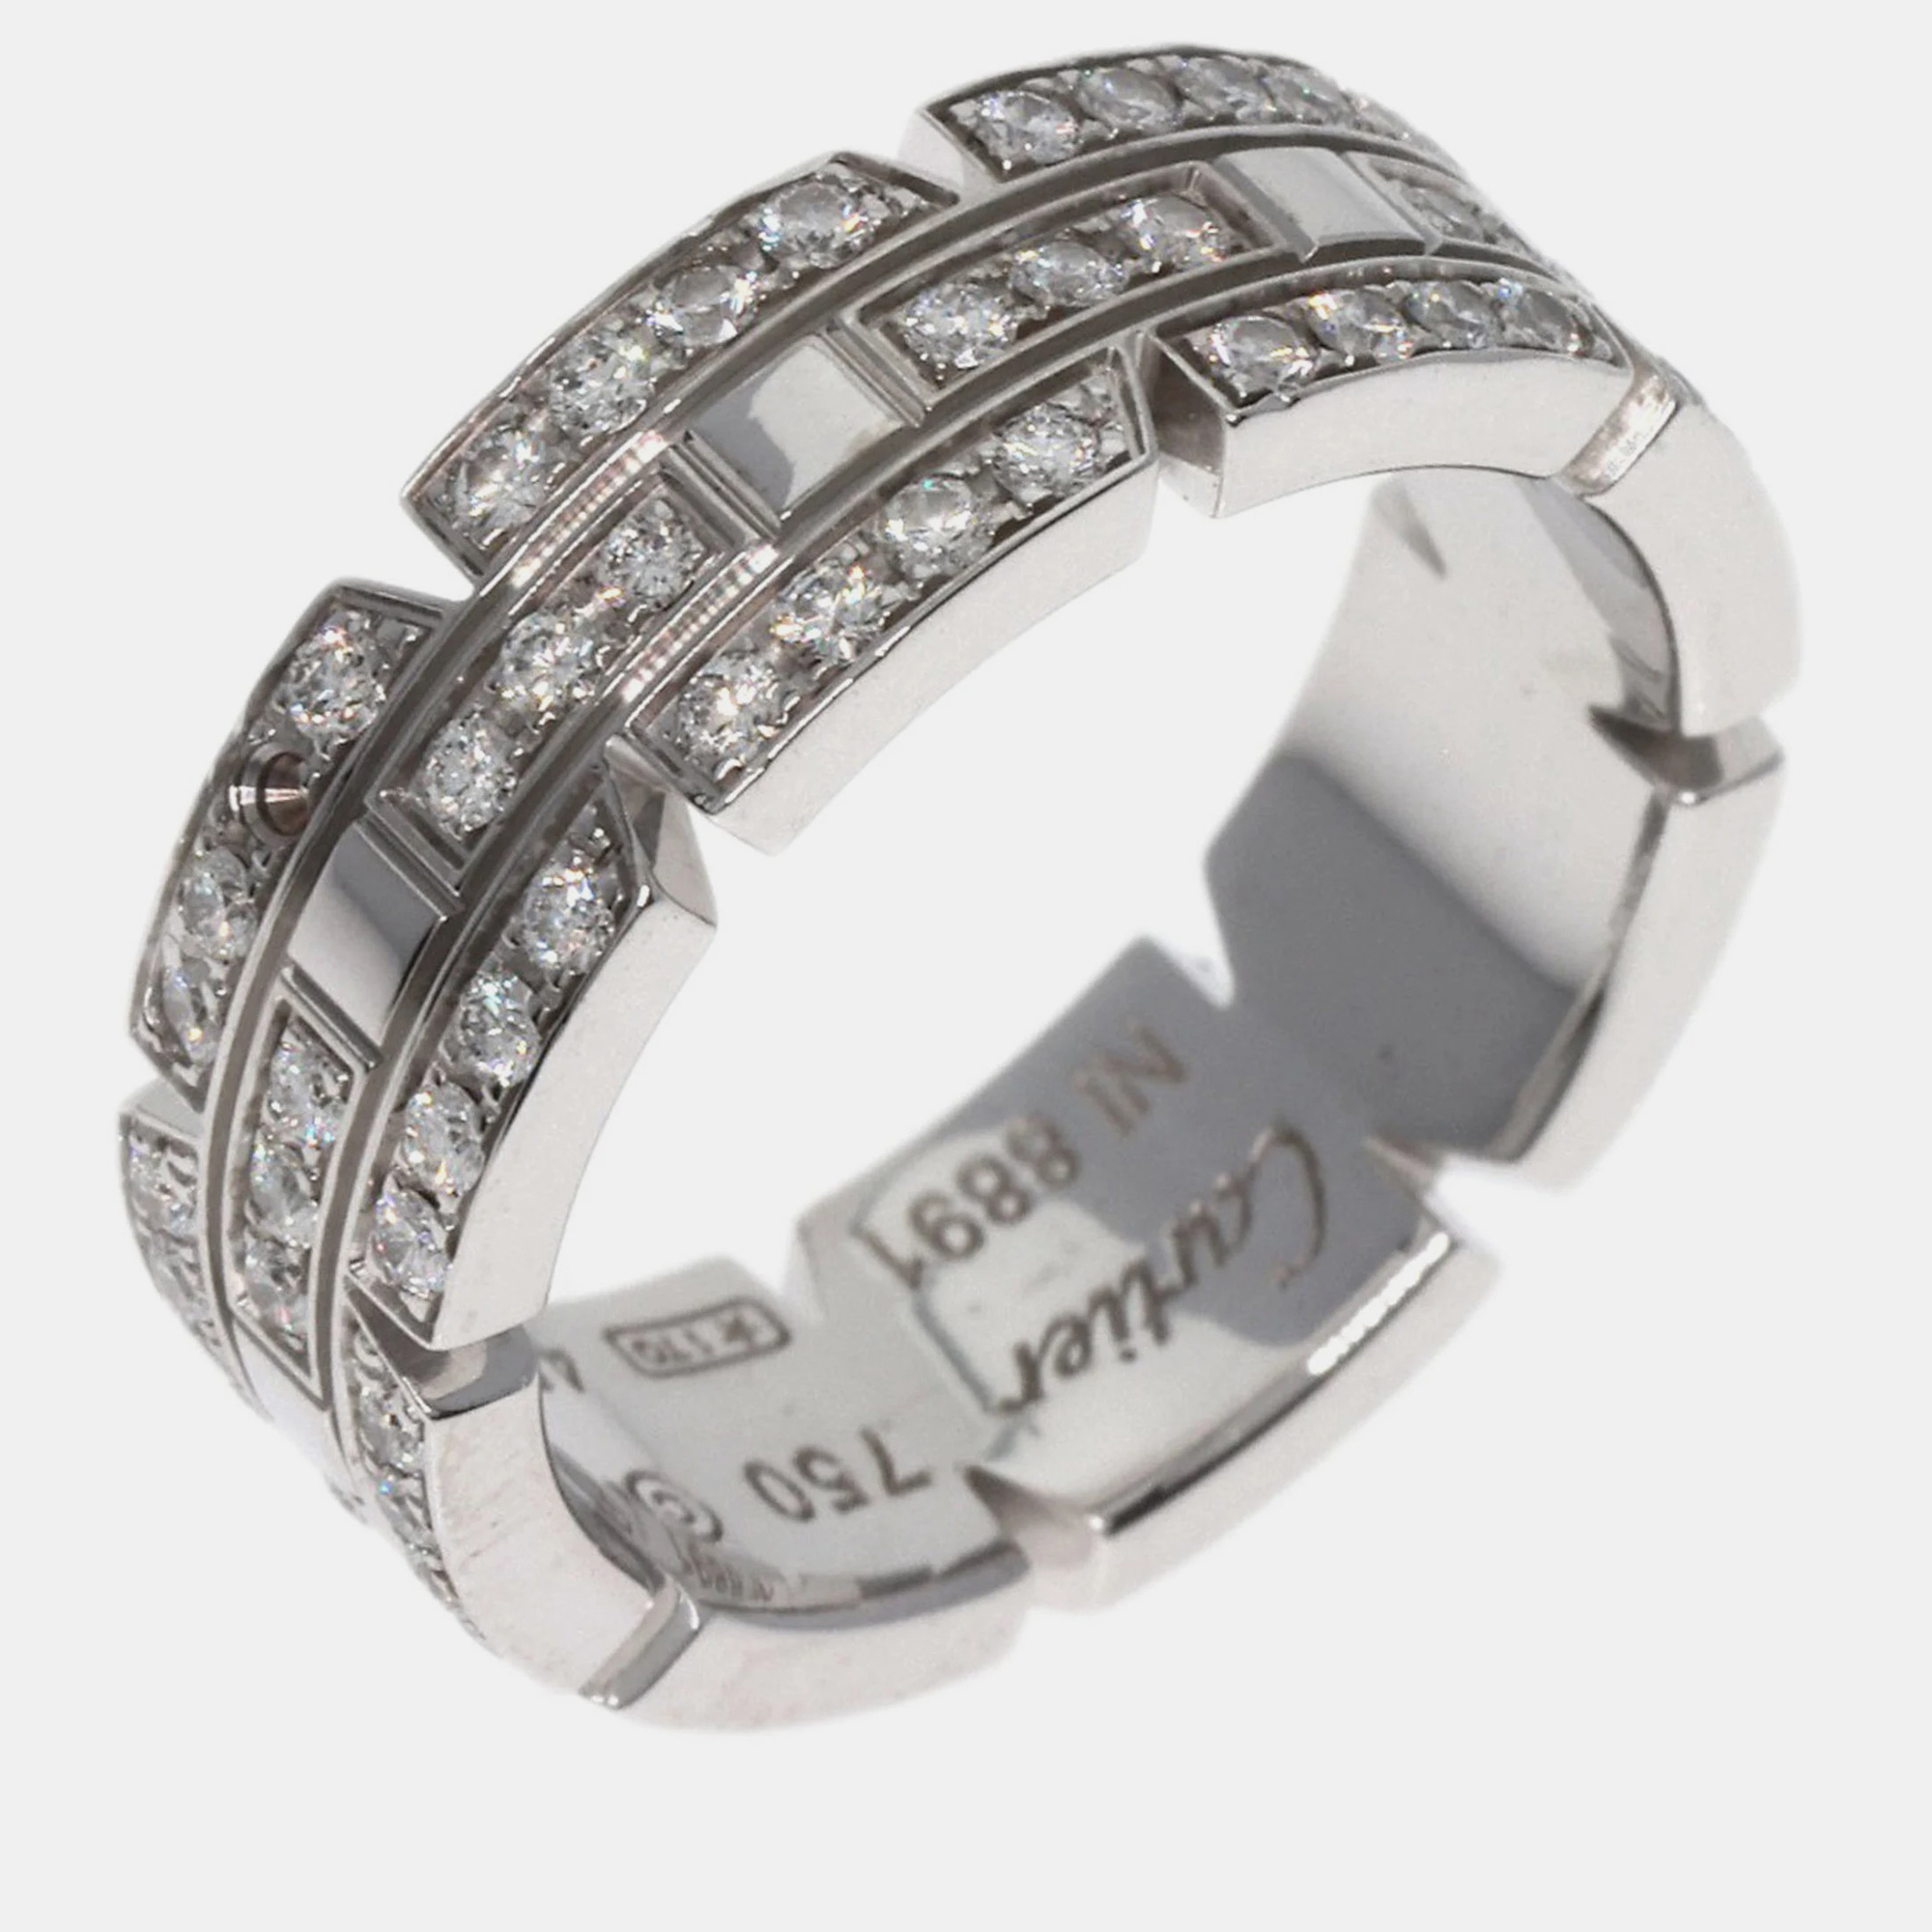 Experience the epitome of luxury and craftsmanship with this meticulously designed Cartier jewelry ring. Its timeless elegance and exceptional detailing make it a statement piece for any occasion.